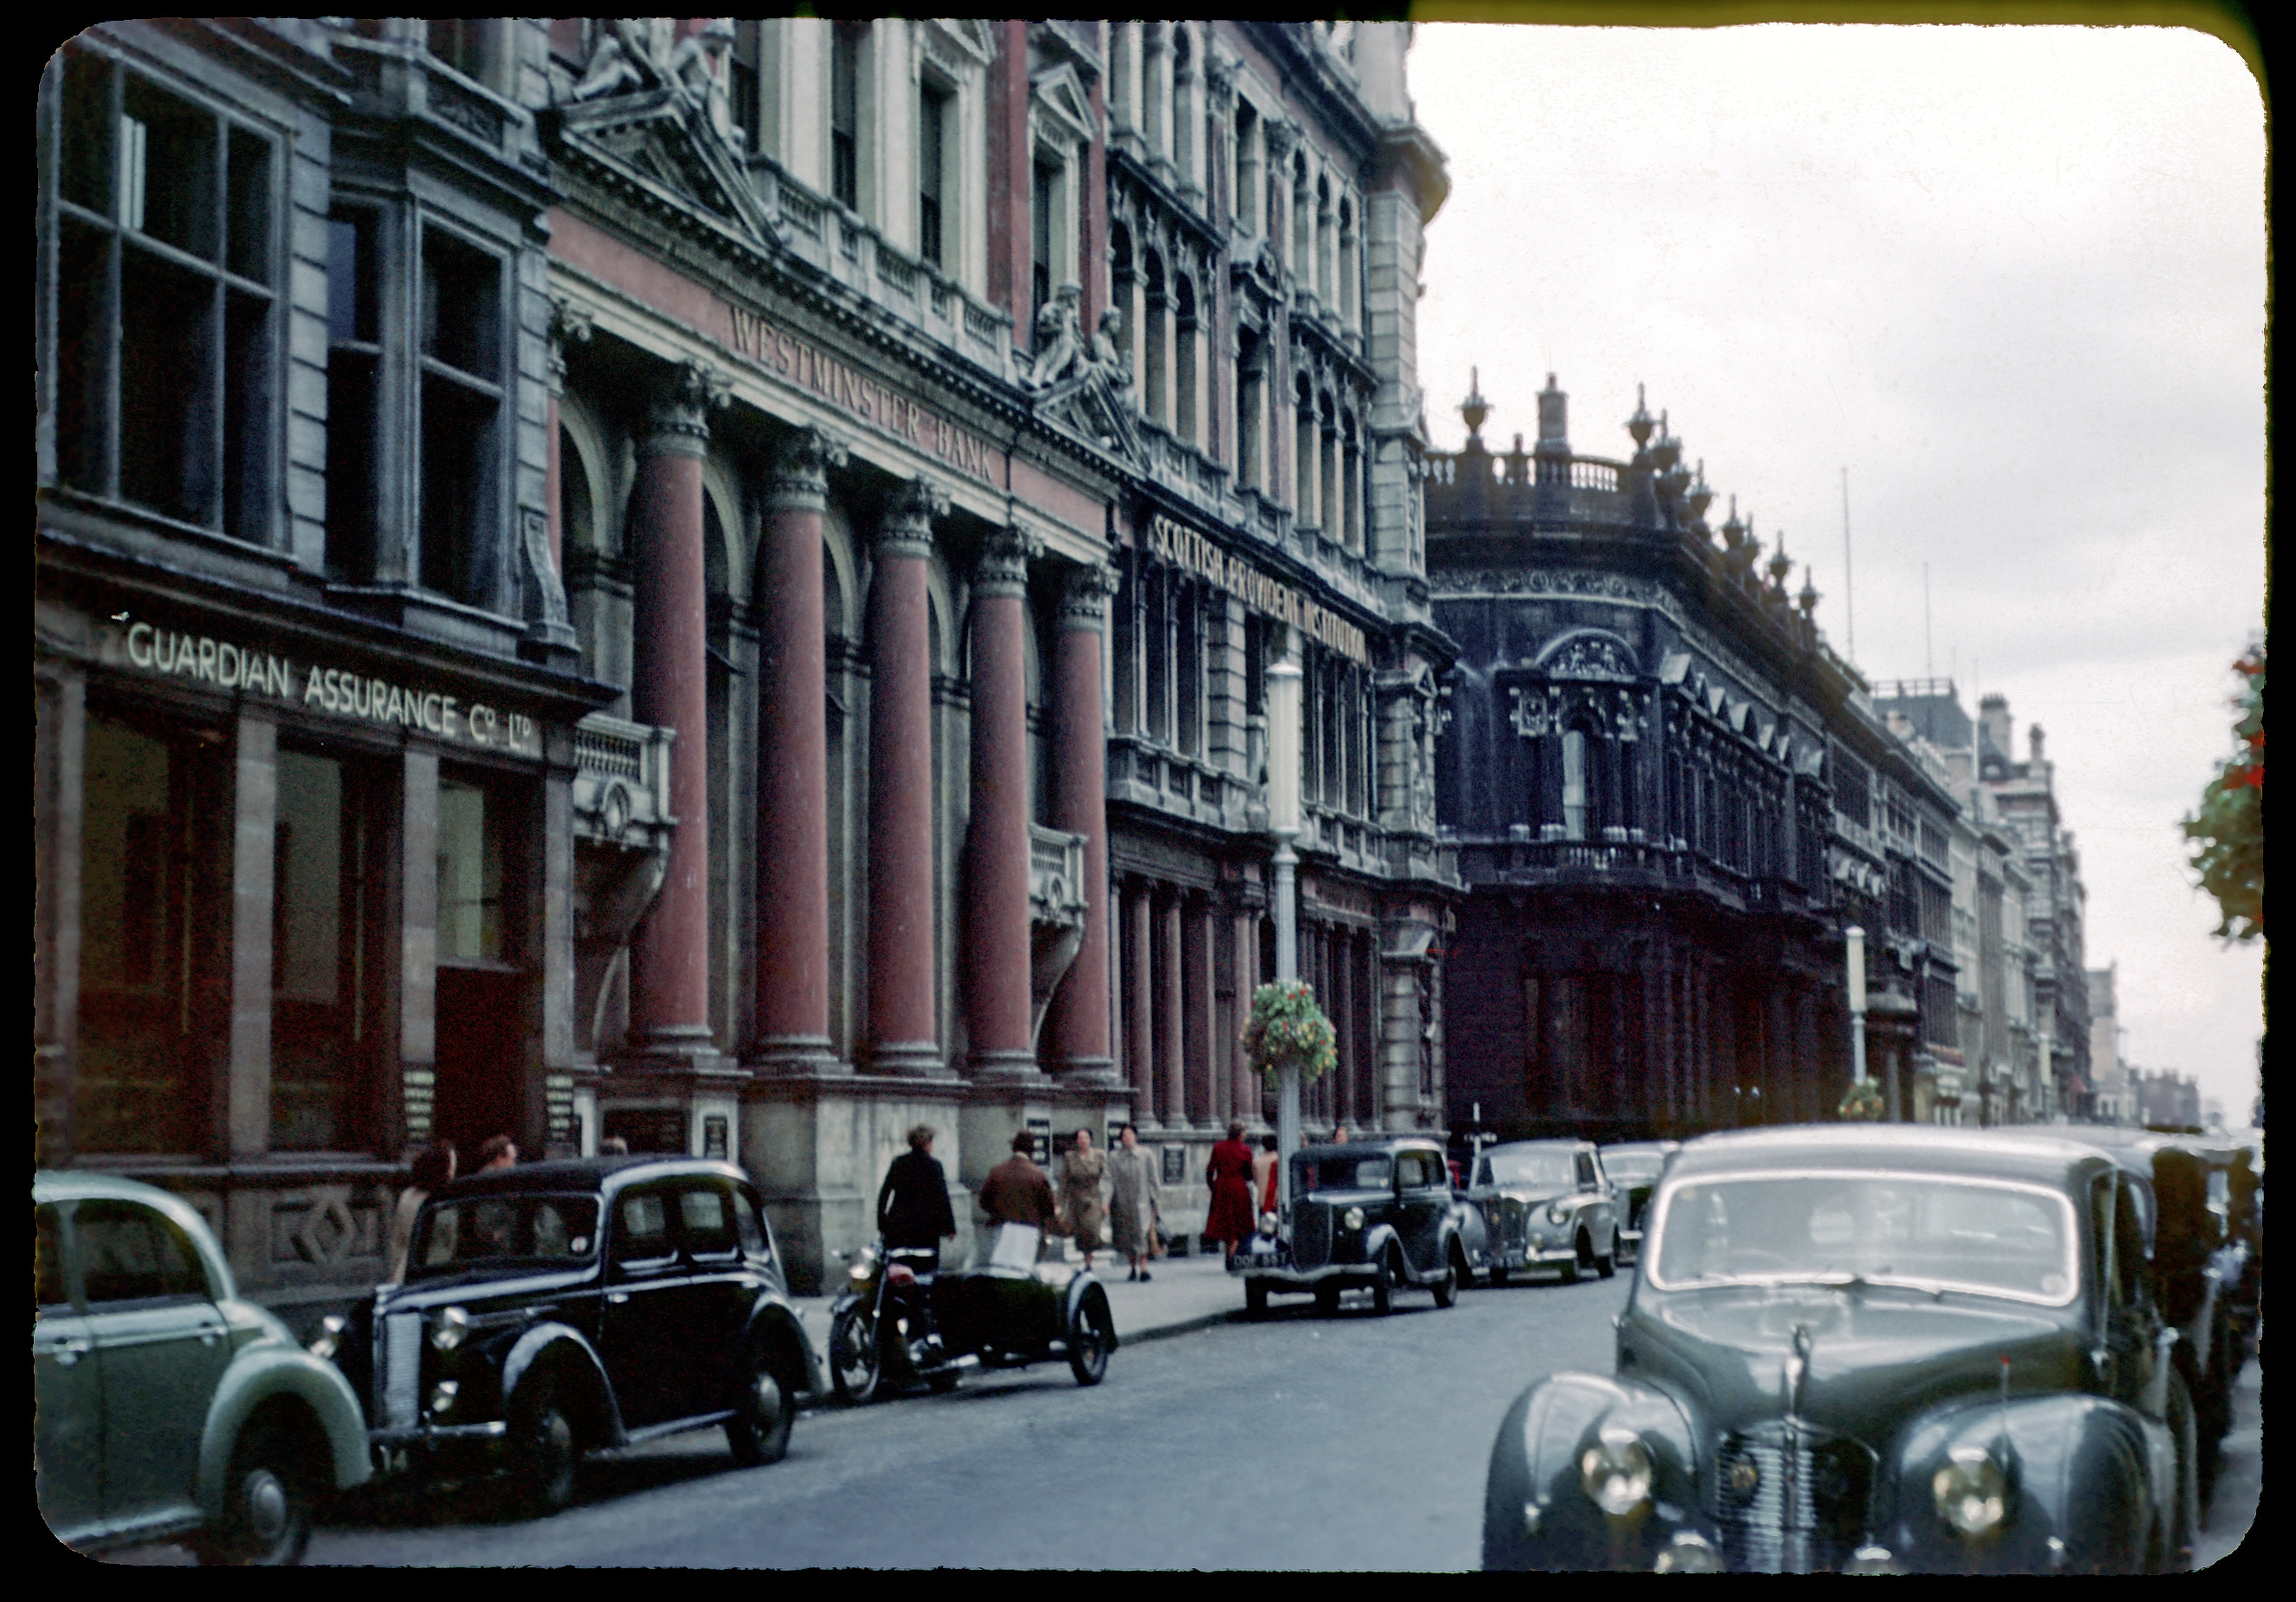 Colmore Row, central Birmingham - ePapers Repository